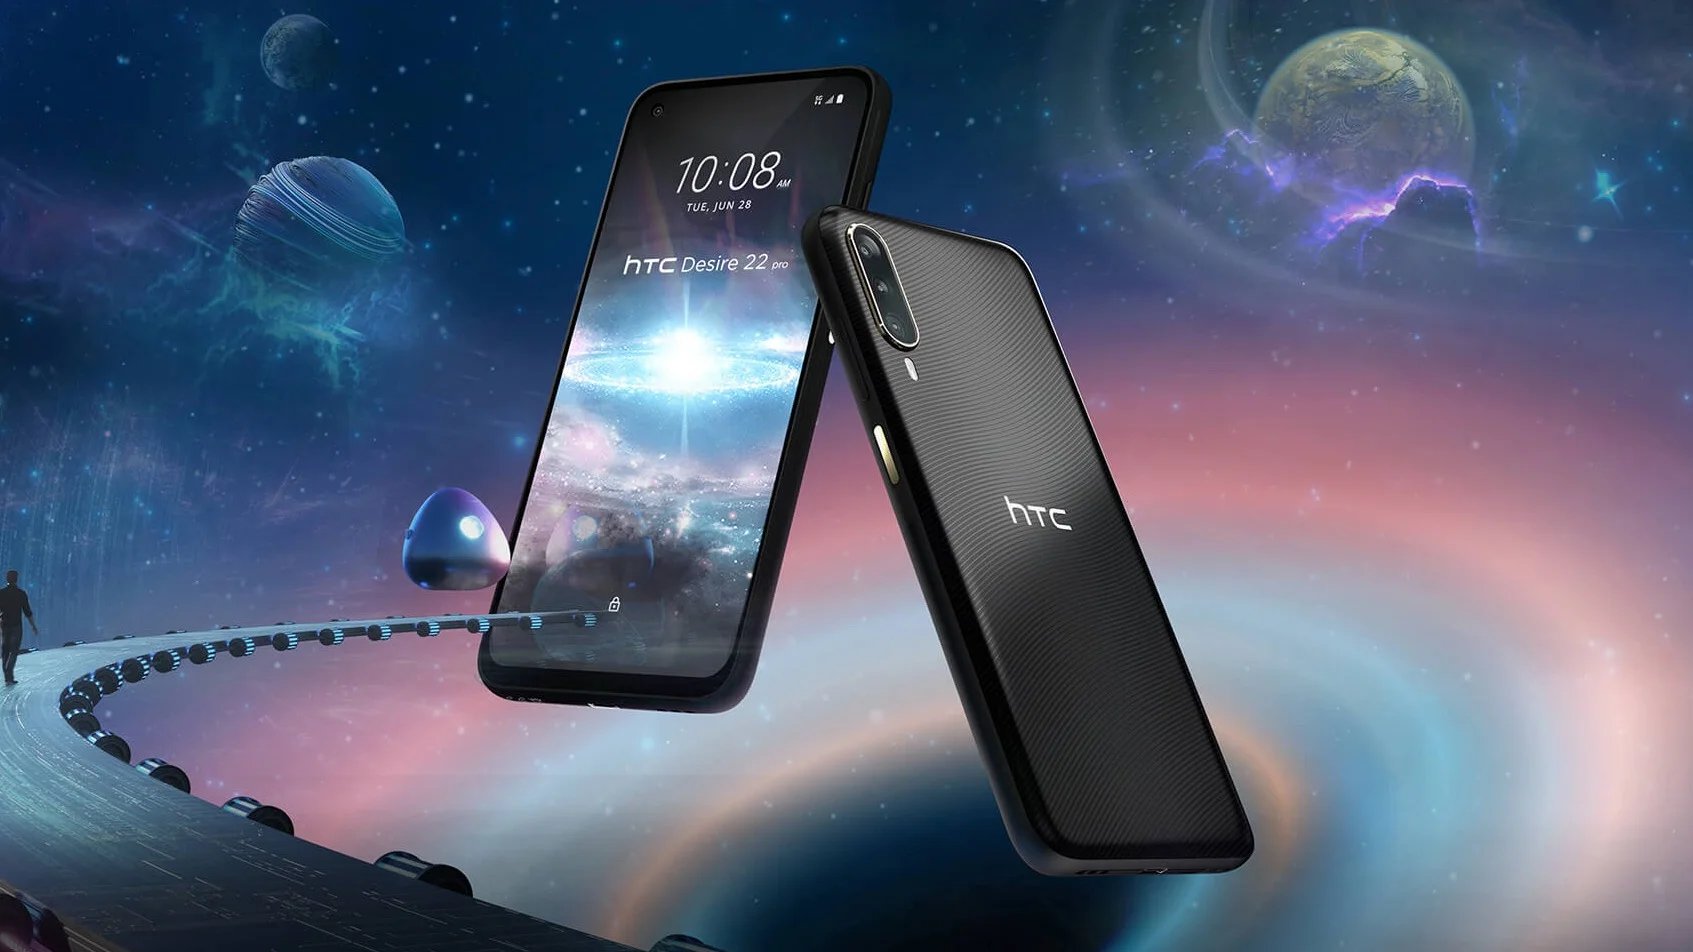 htc-desire-22-pro-is-a-budget-phone-made-for-the-metaverse